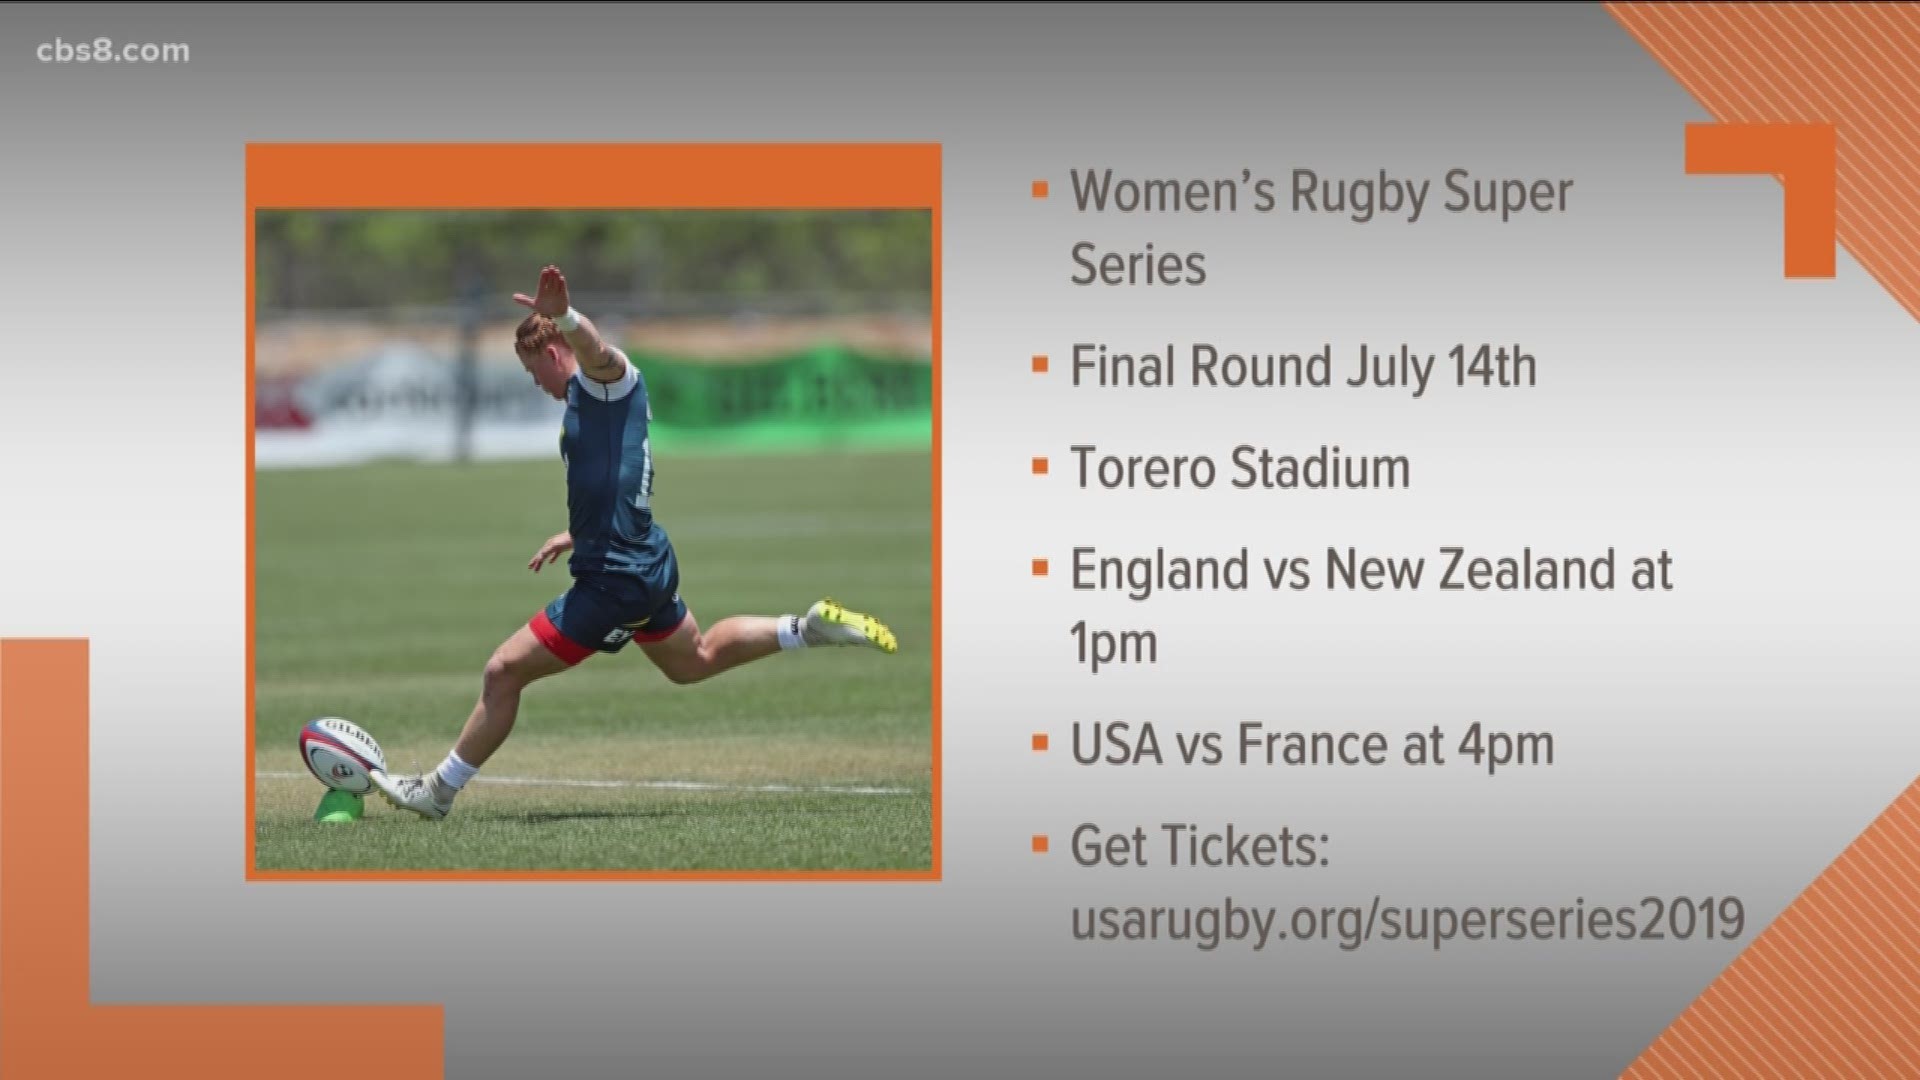 U.S. Women's National Rugby Team plays the Super Series Final Round on Sunday, July 14